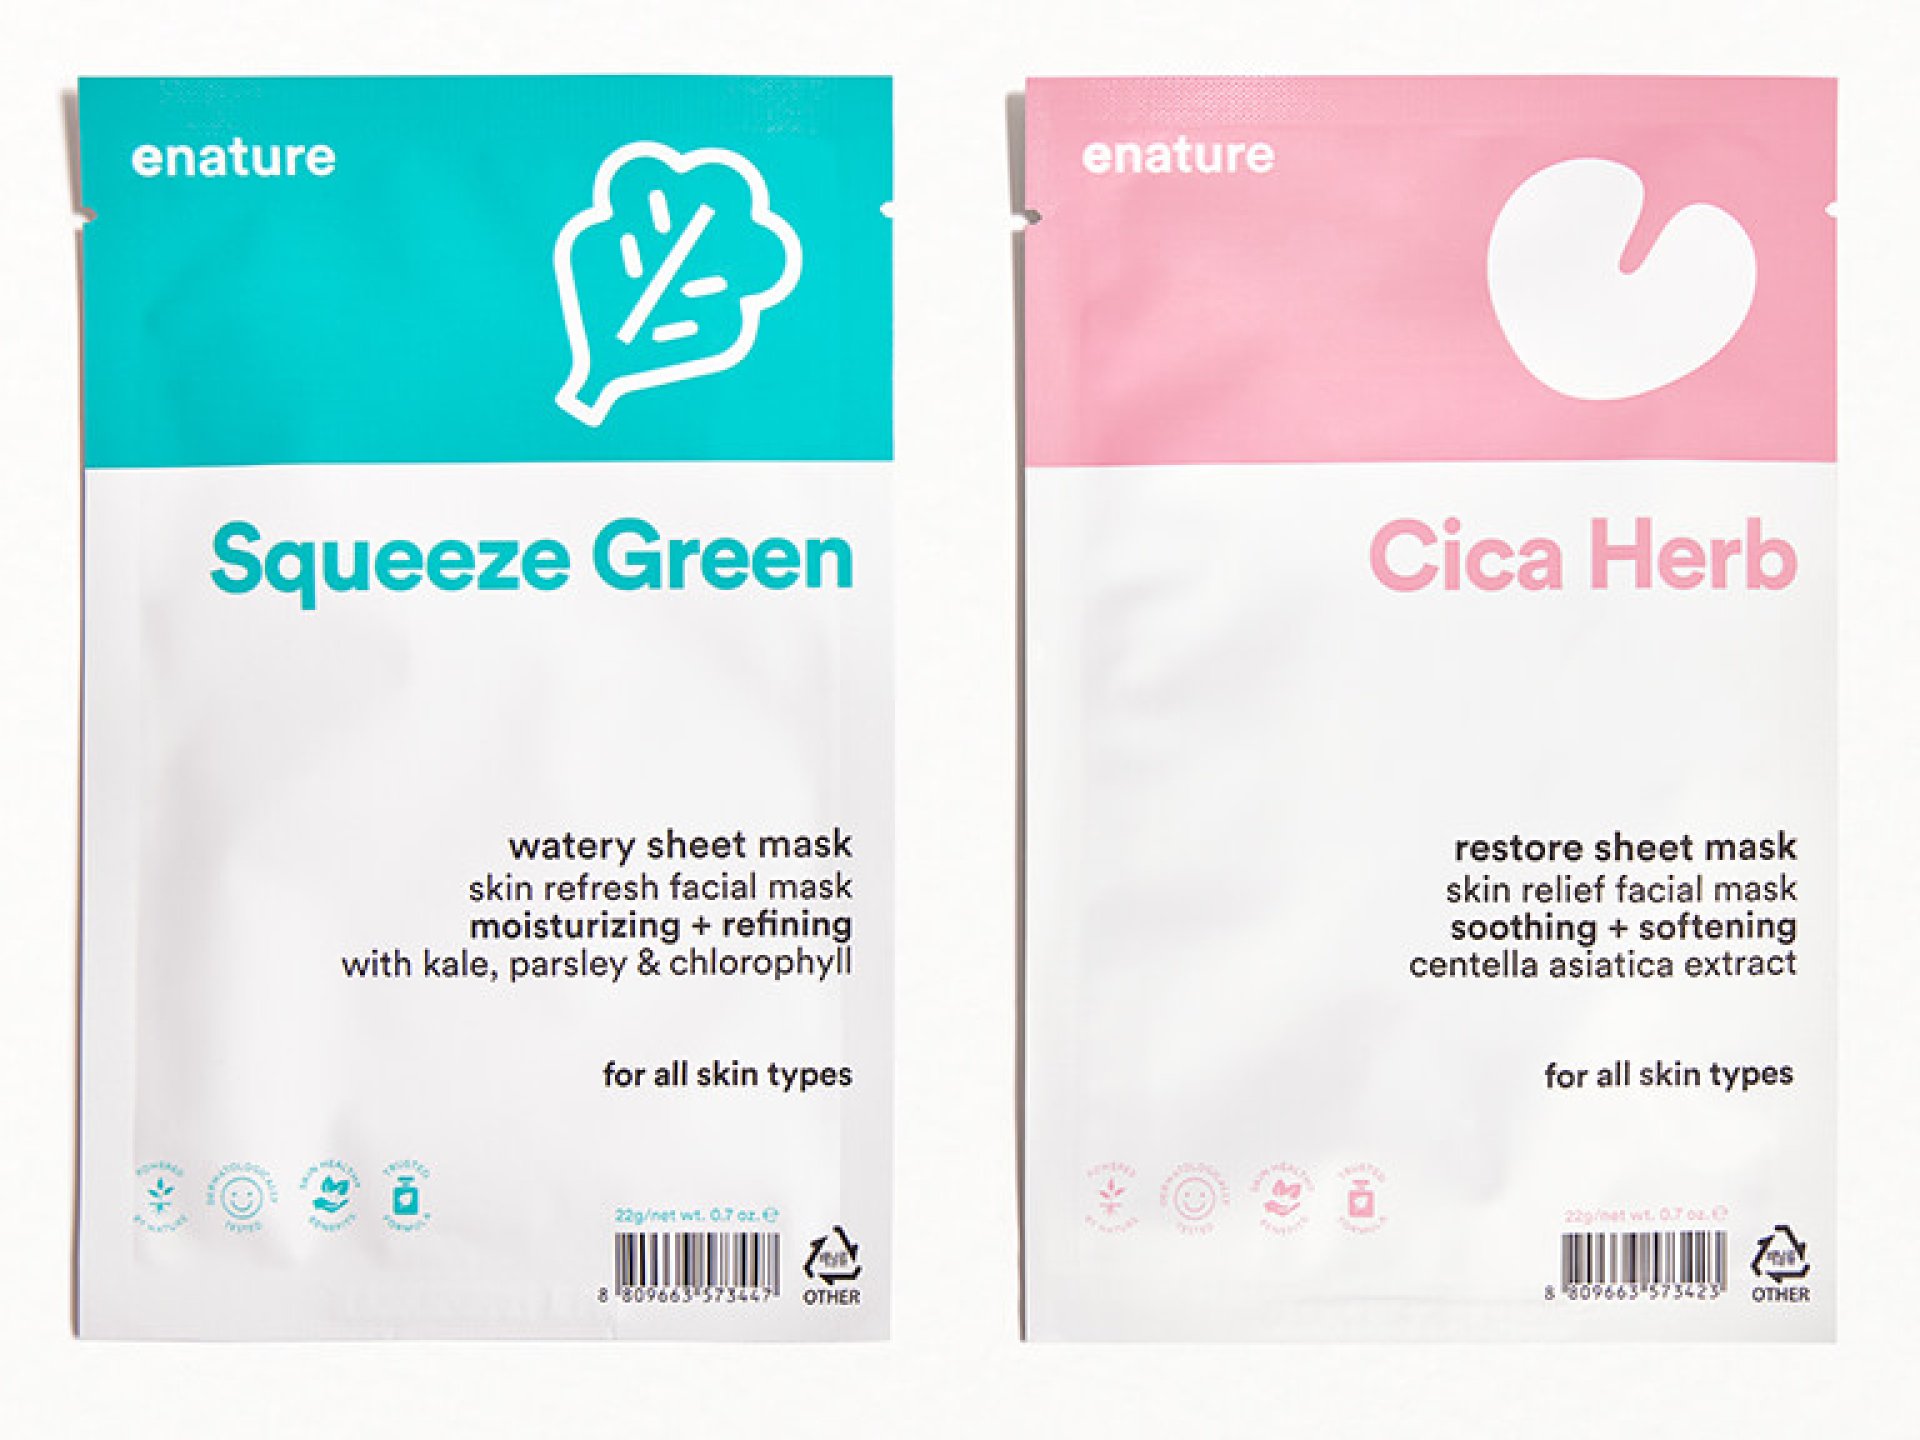 ENATURE Cica Herb Restore and Squeeze Green Watery Sheet Mask Duo copy